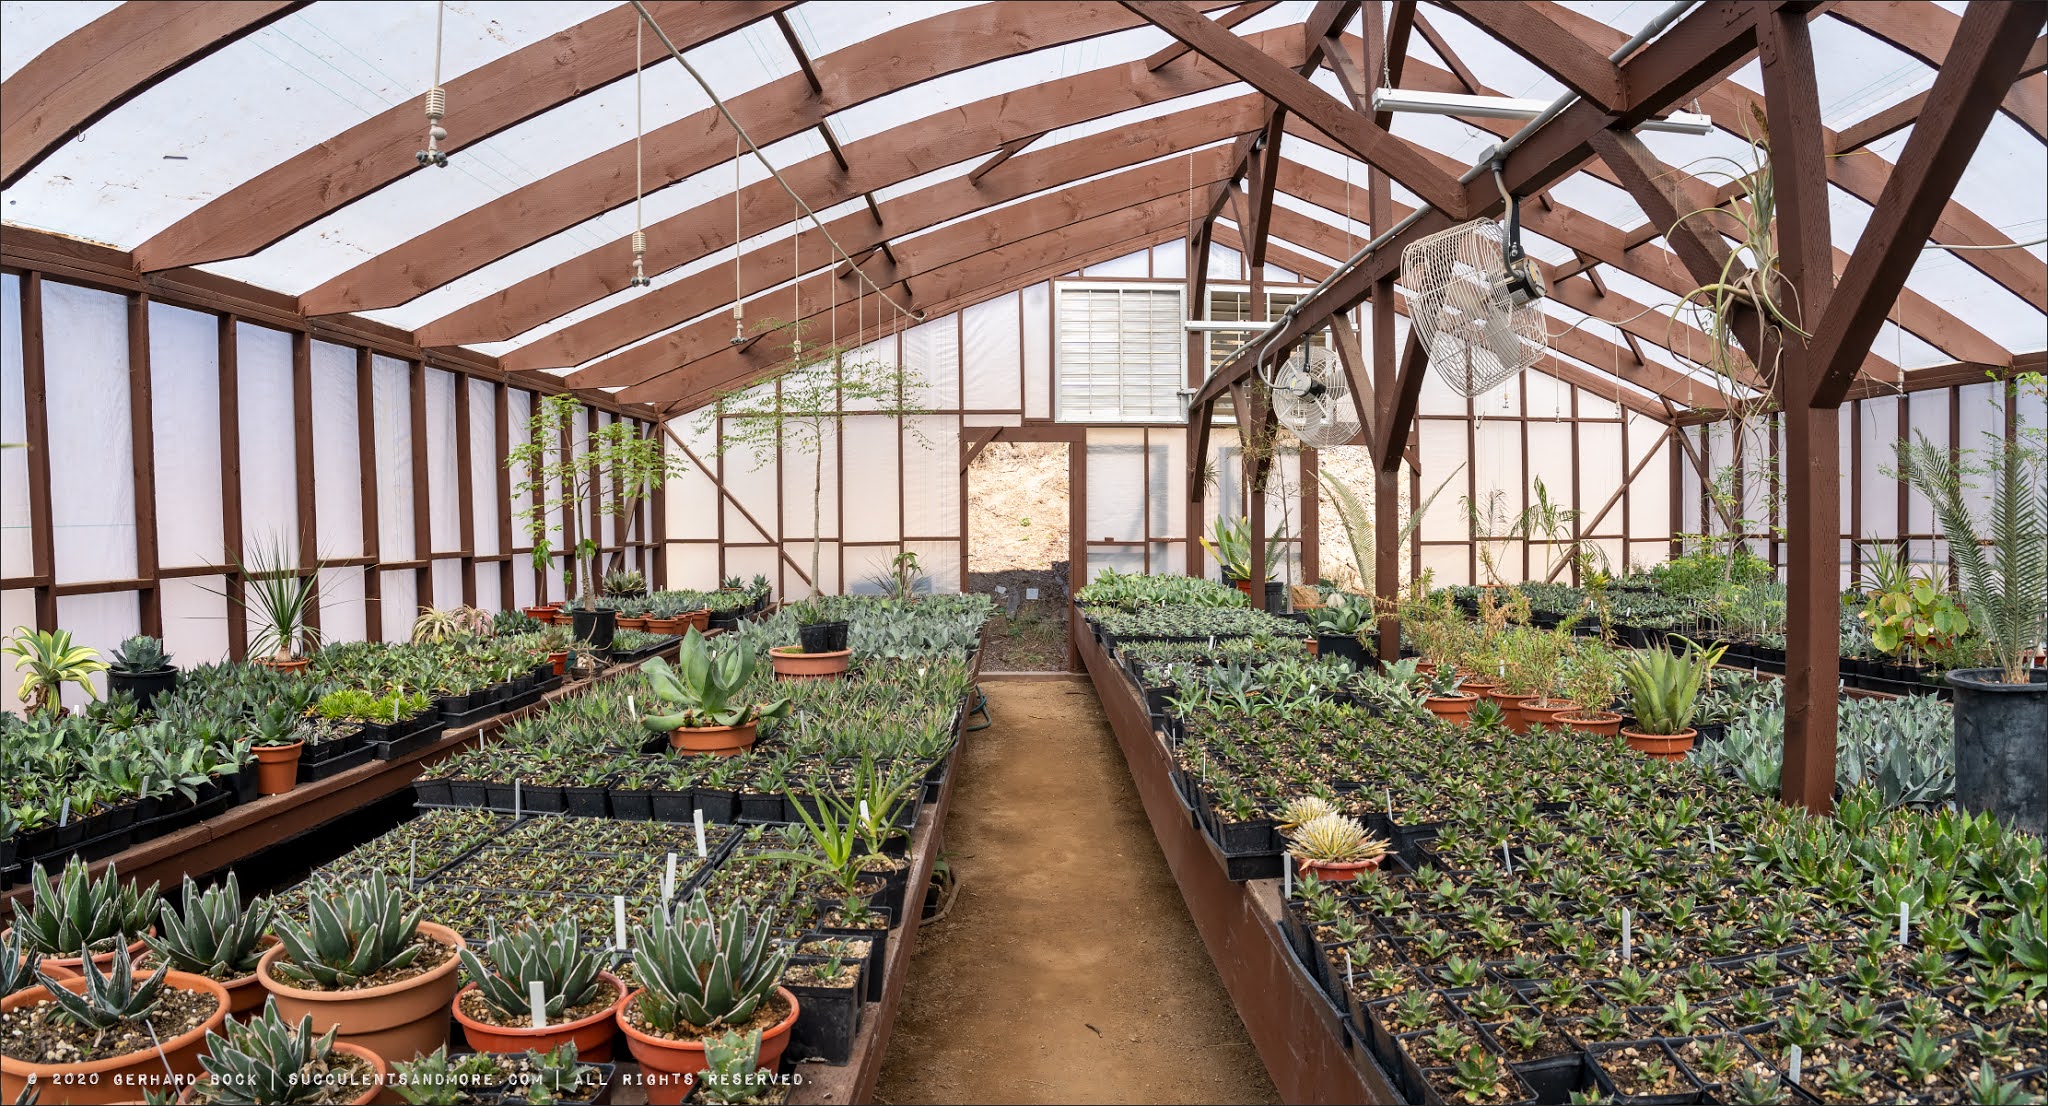 Jeremy Spath's Hidden Agave Ranch: the greenhouse